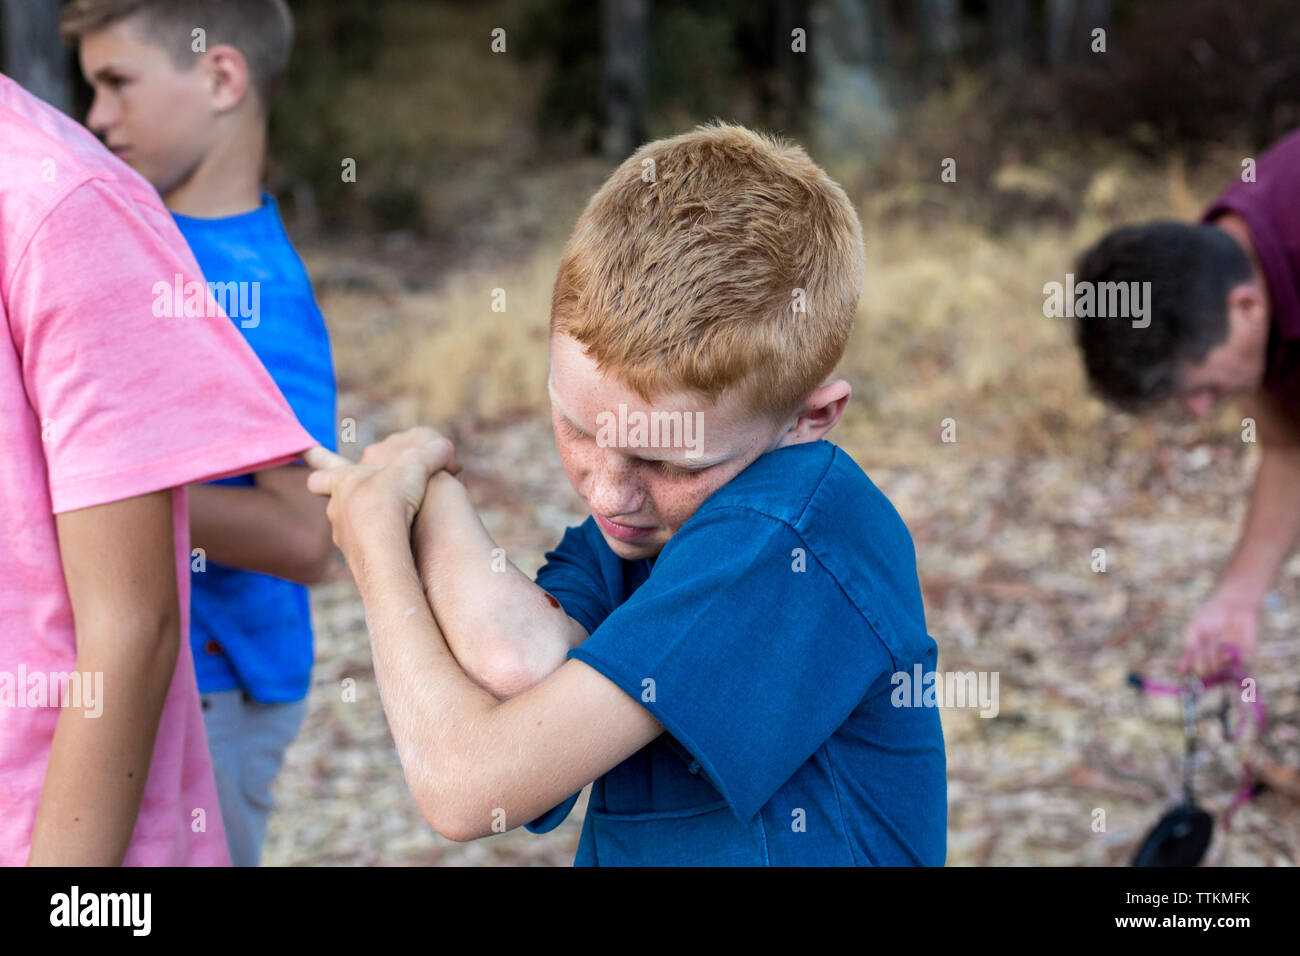 Boy with red hair and freckles observes the scrape on his arm Stock Photo